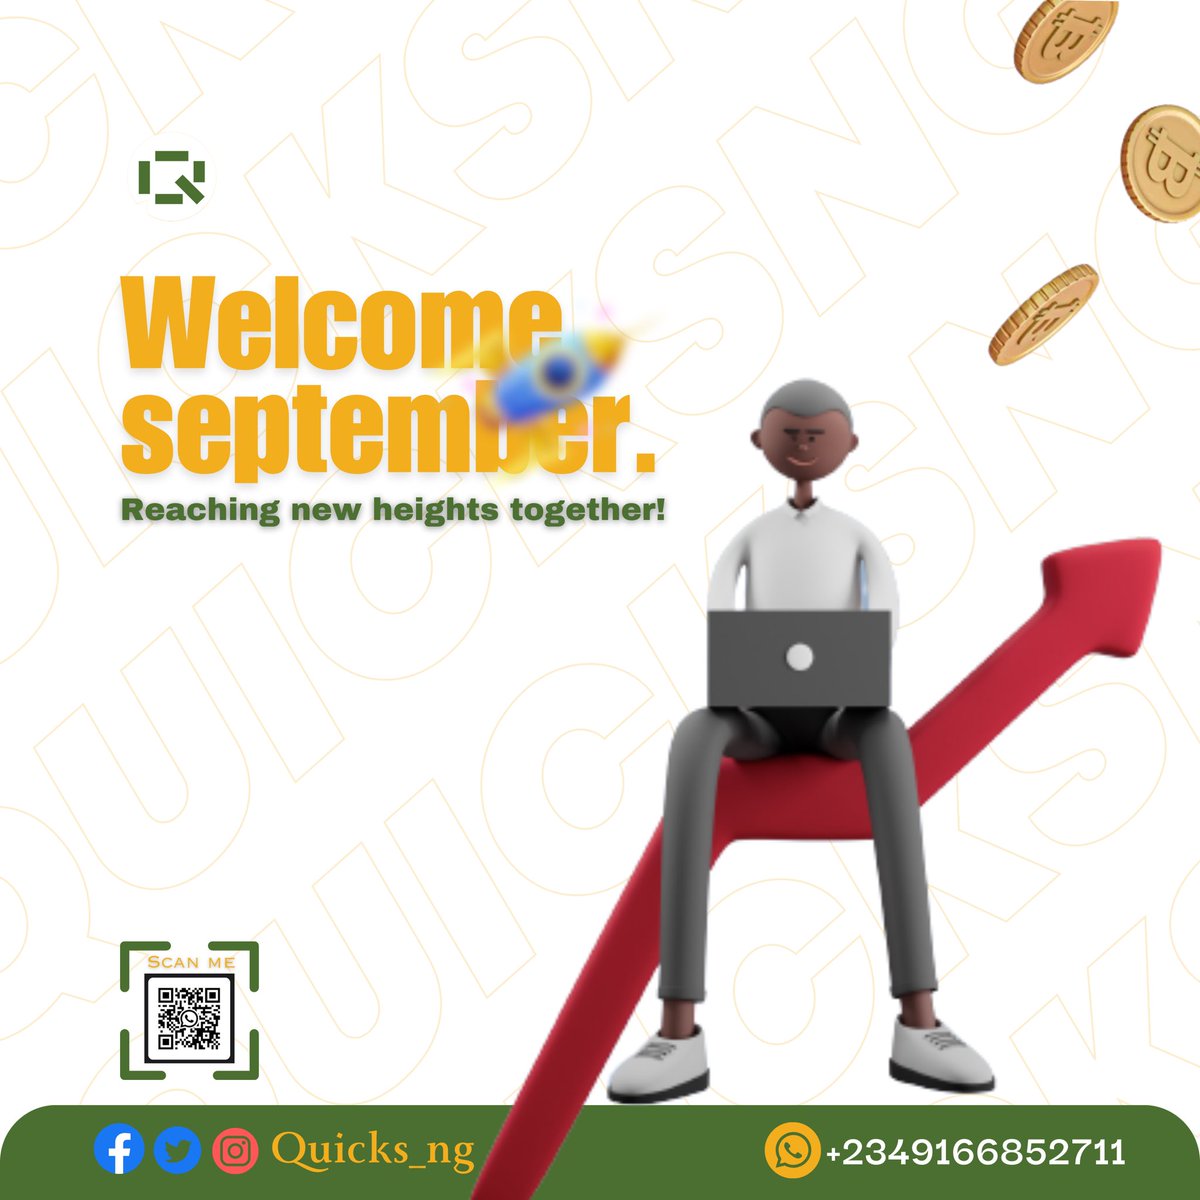 It’s the beginning of a new month & a fresh start to set goals straight and achieve them.

Let’s help you smash your goals of reaching new financial heights through your exchange of digital assets.

Happy new month.

#quicksng
#newmonthnewgoals